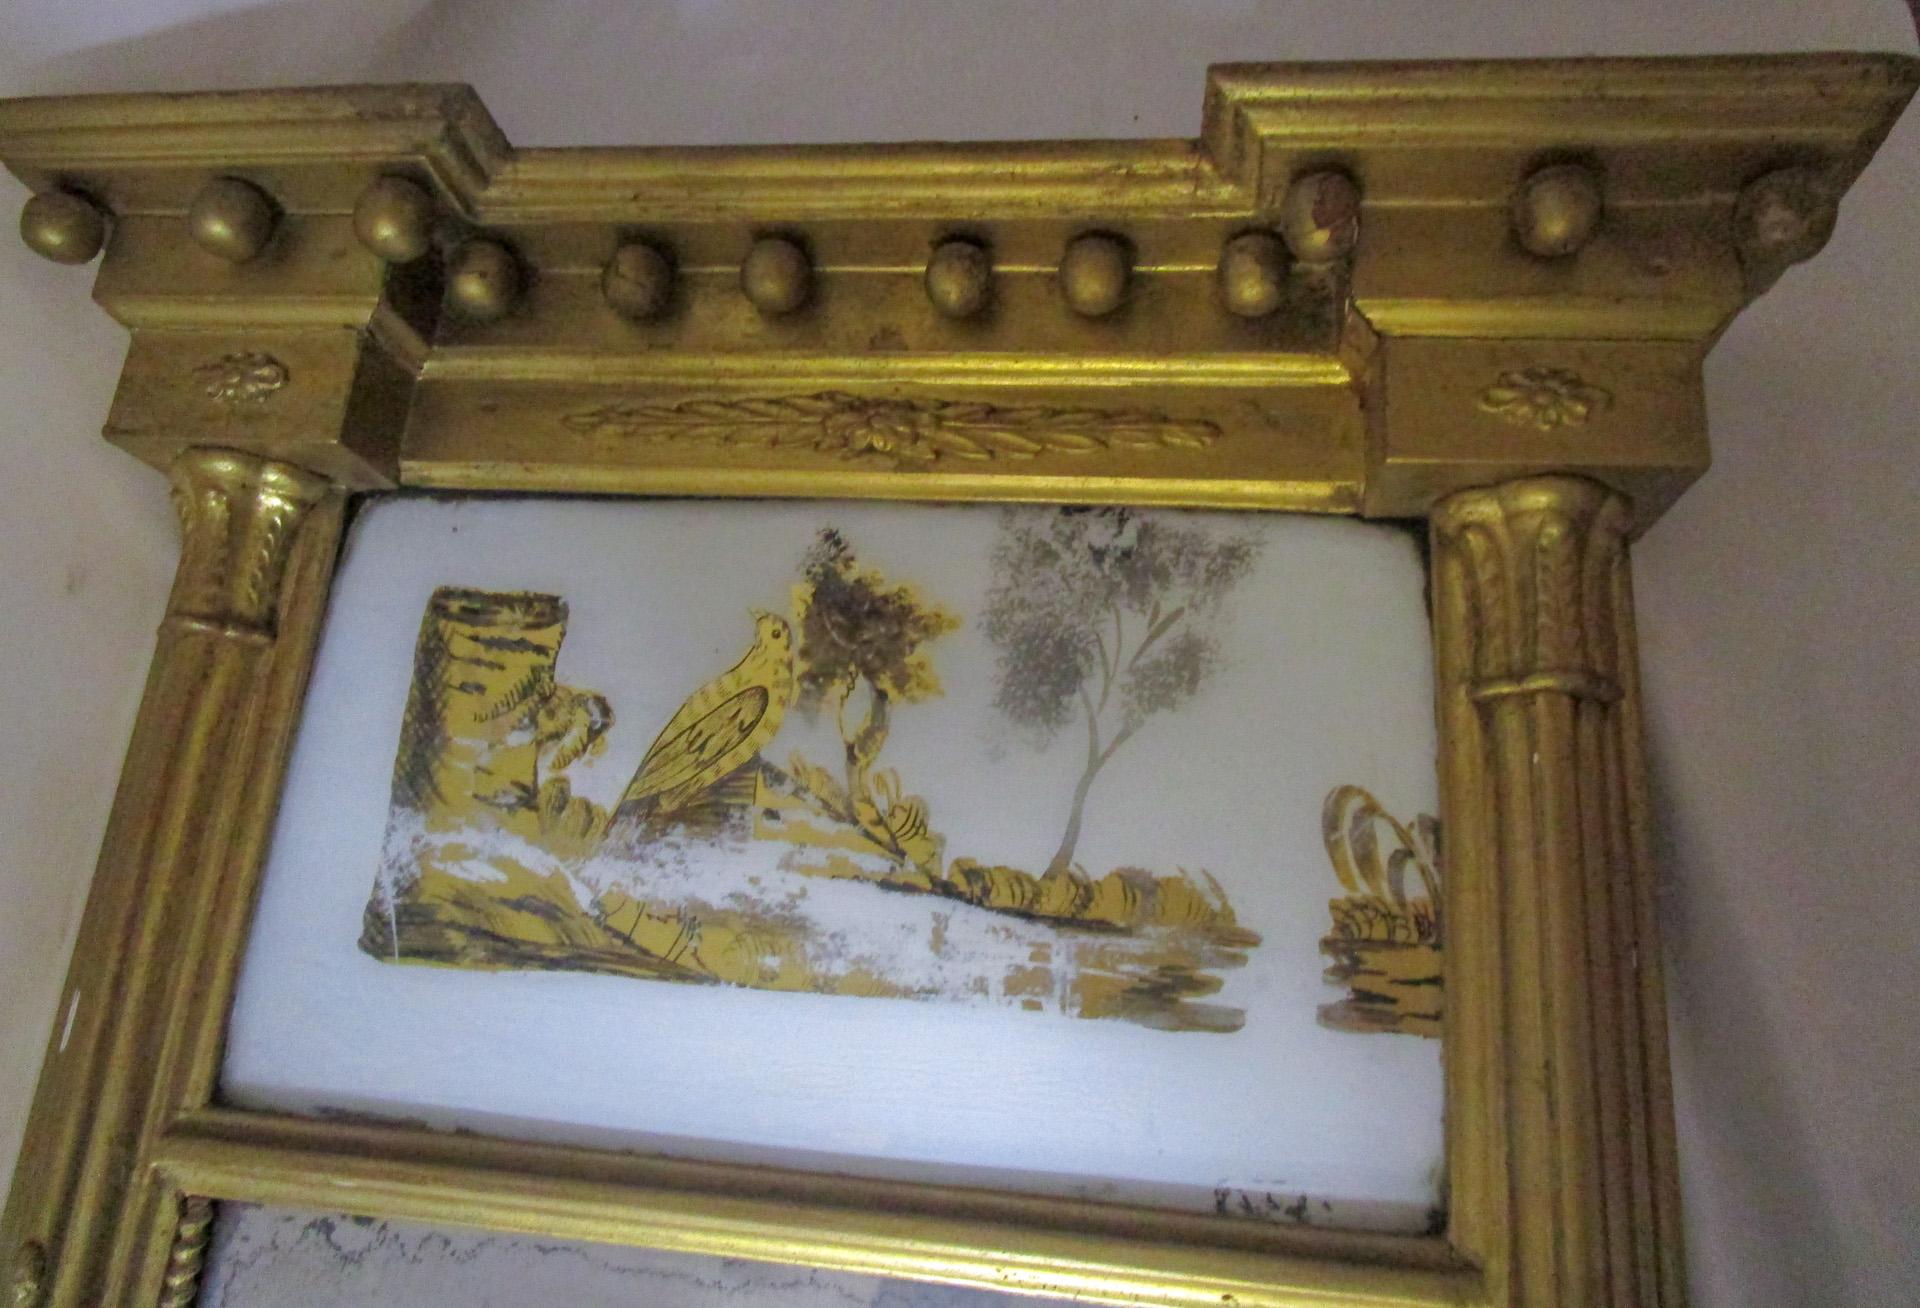 Circa 1820 giltwood architectural style looking glass with a reverse painted woodland scene eglomise tablet flanked with reeded columns, beading and appliques. Historian Rodric Blackburn writes that “the talent and some demand for such looking